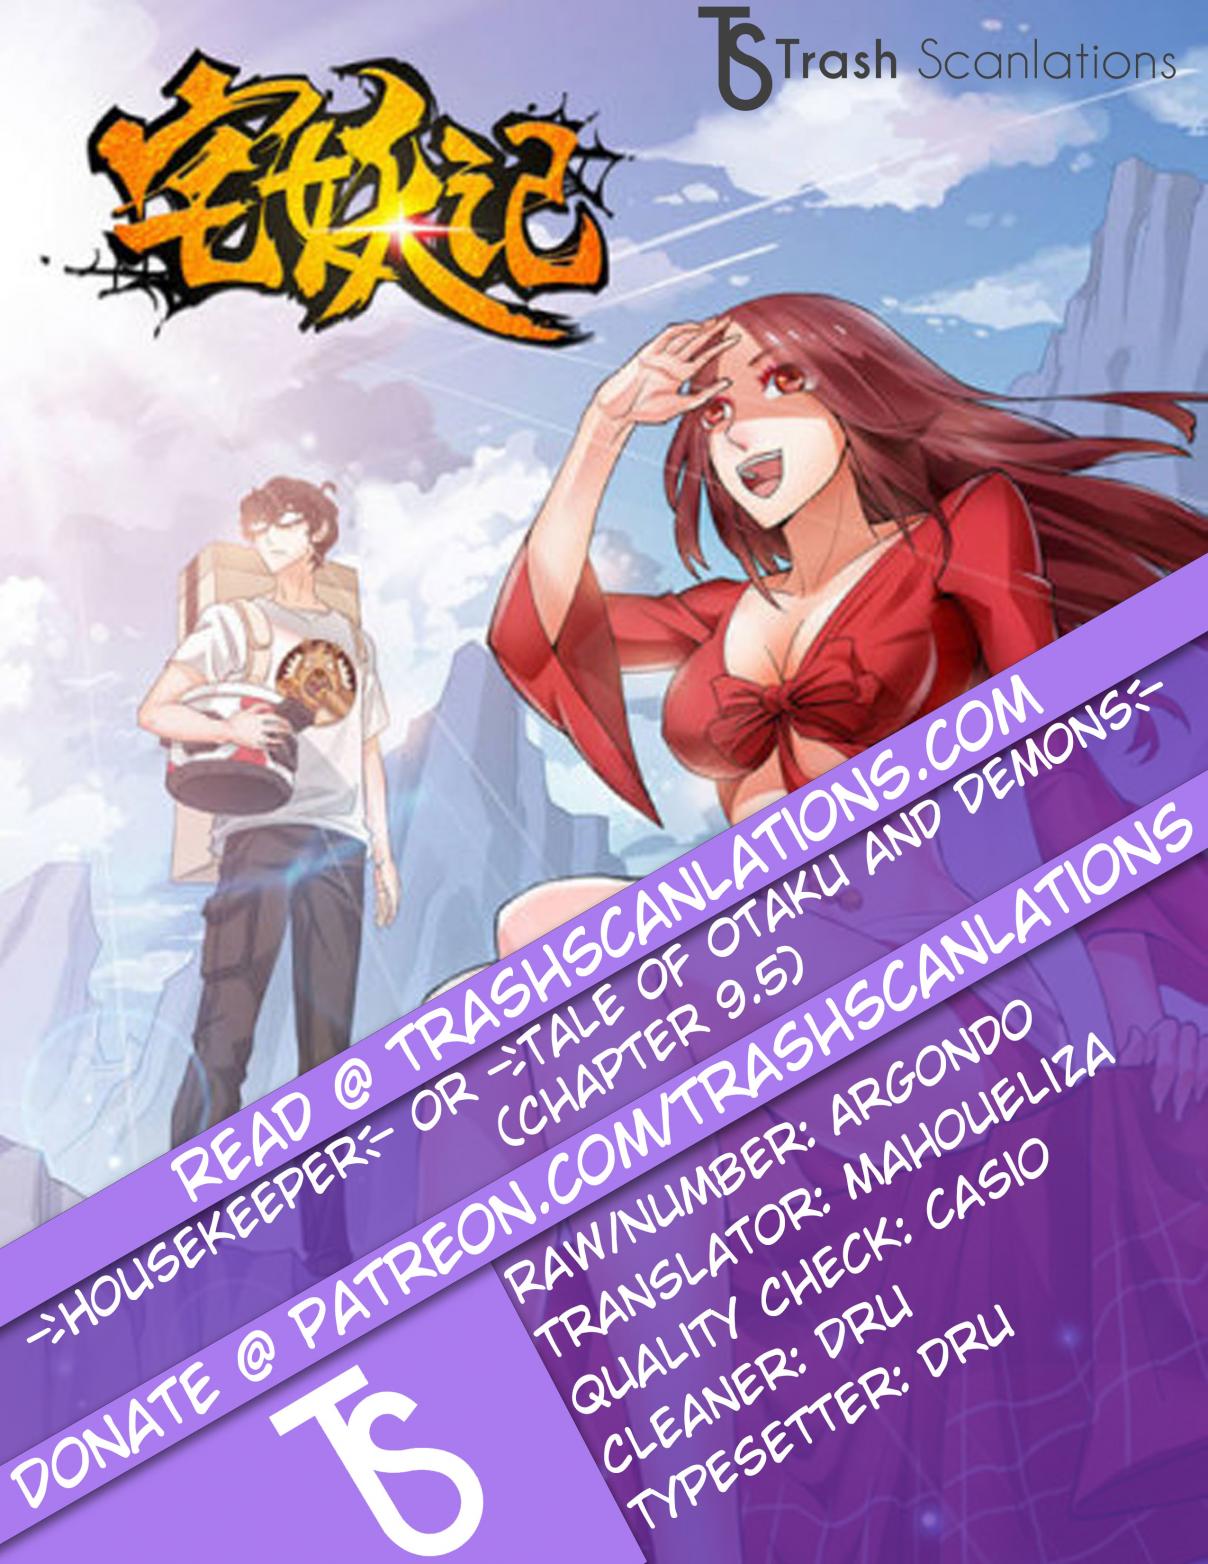 Tale of Otaku and Demons Ch. 9.5 Duanwu Festival Special Chapter